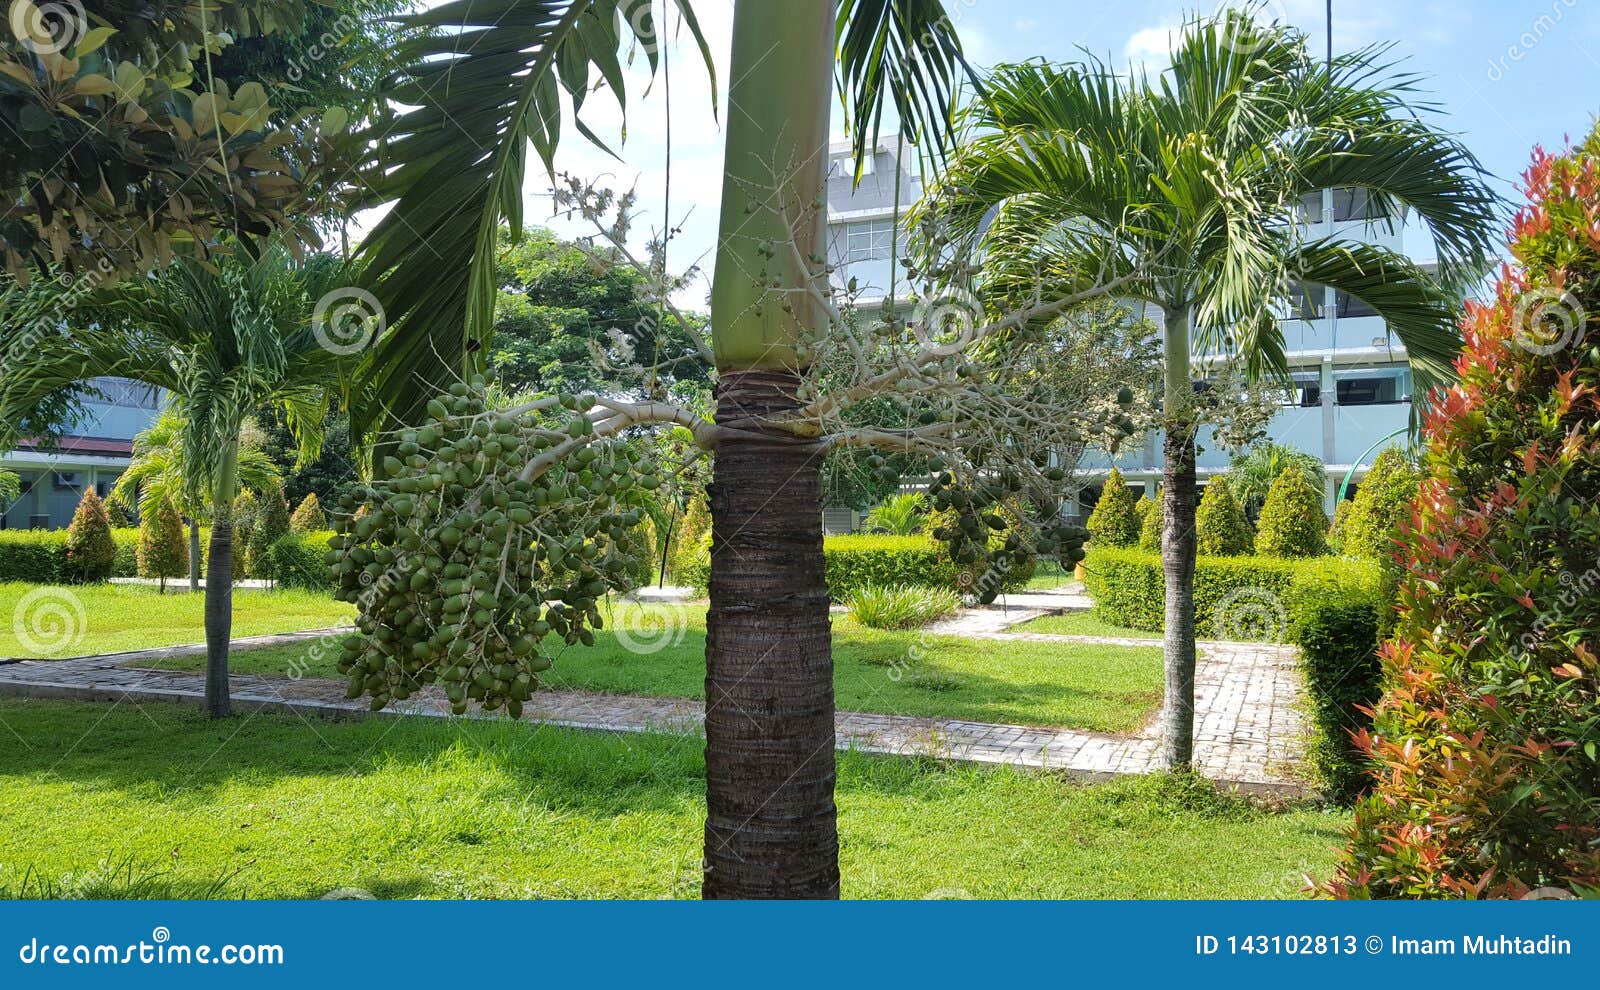 Palmtrees In Park Hospital With Natural Plants That Give The